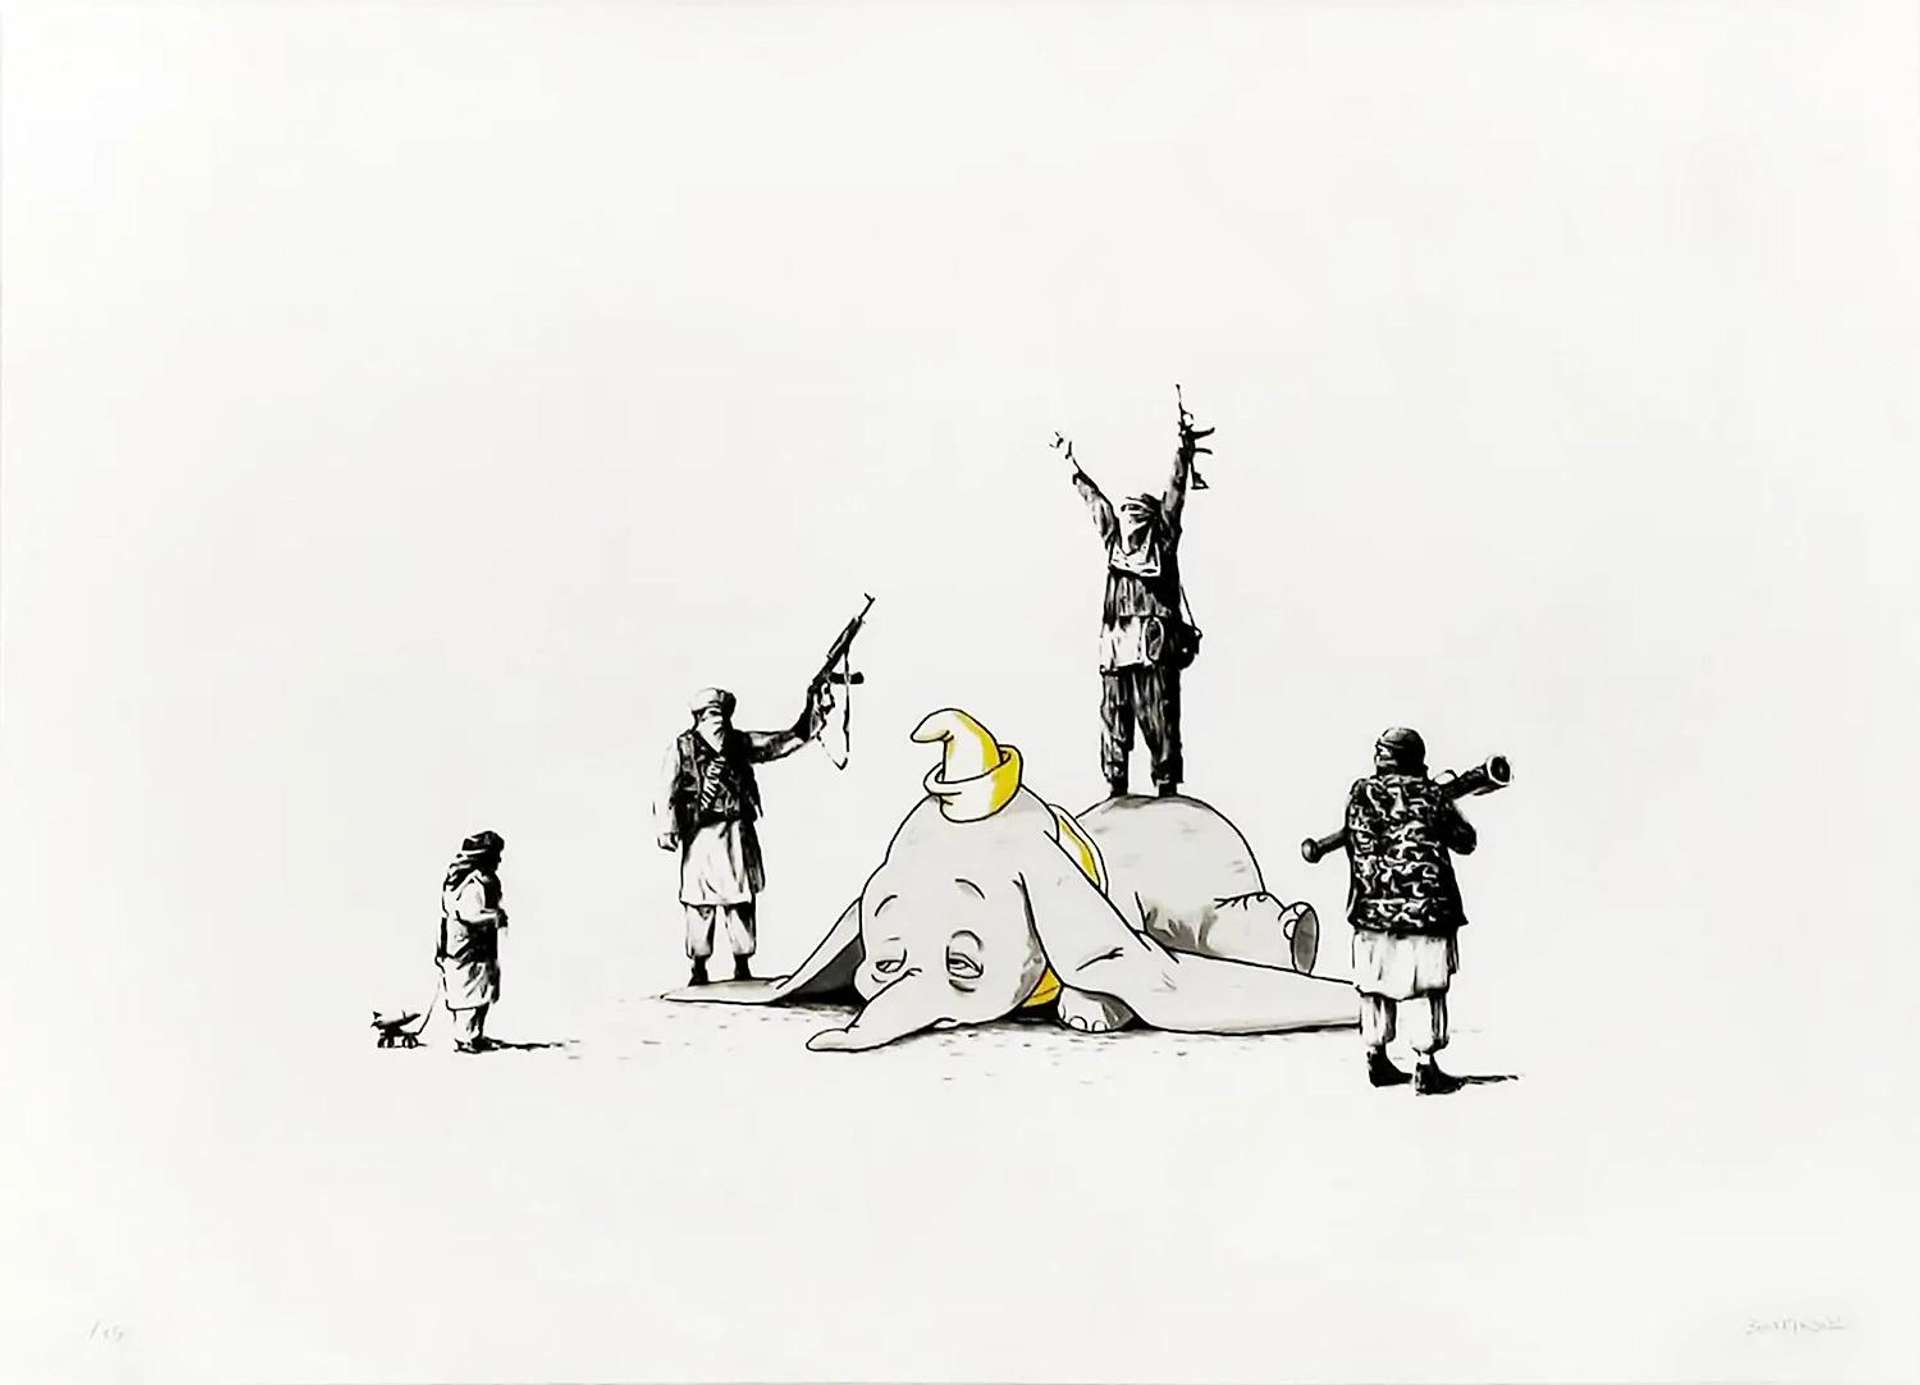 This print by Banksy shows what appears to be Islamic militants carrying rocket launchers and other weapons alongside the body of Dumbo, the elephant known from Disney.